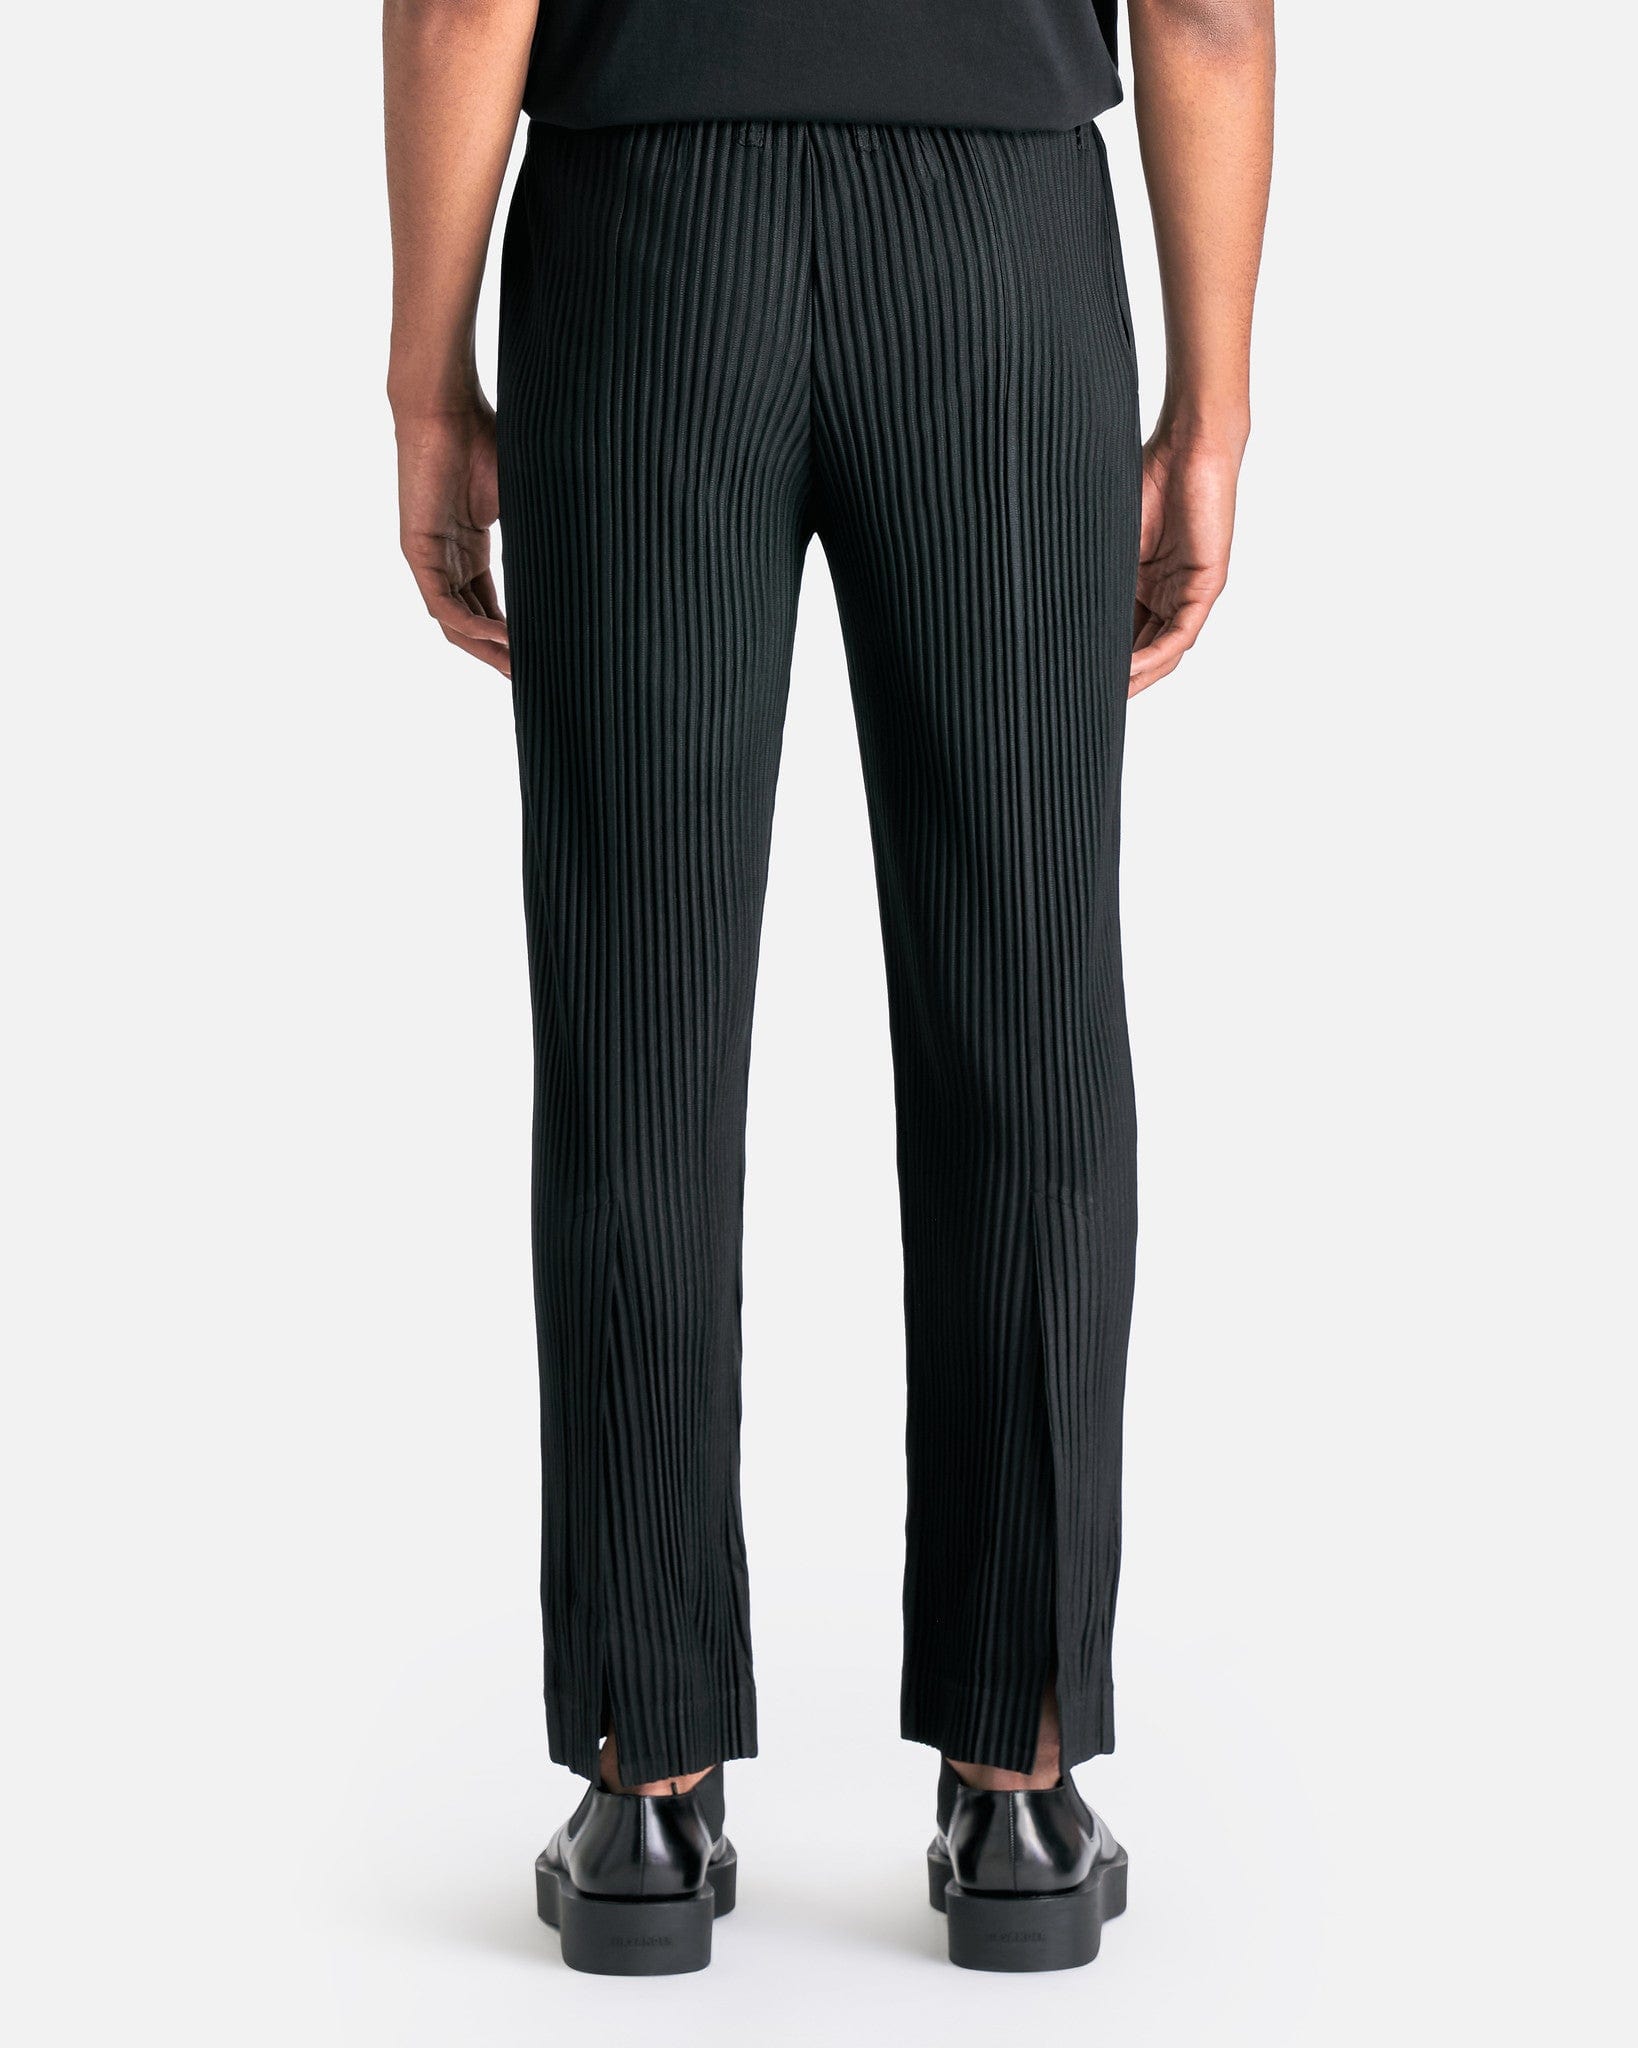 Tailored Pleats 1 Trousers in Black 02 at Svrn